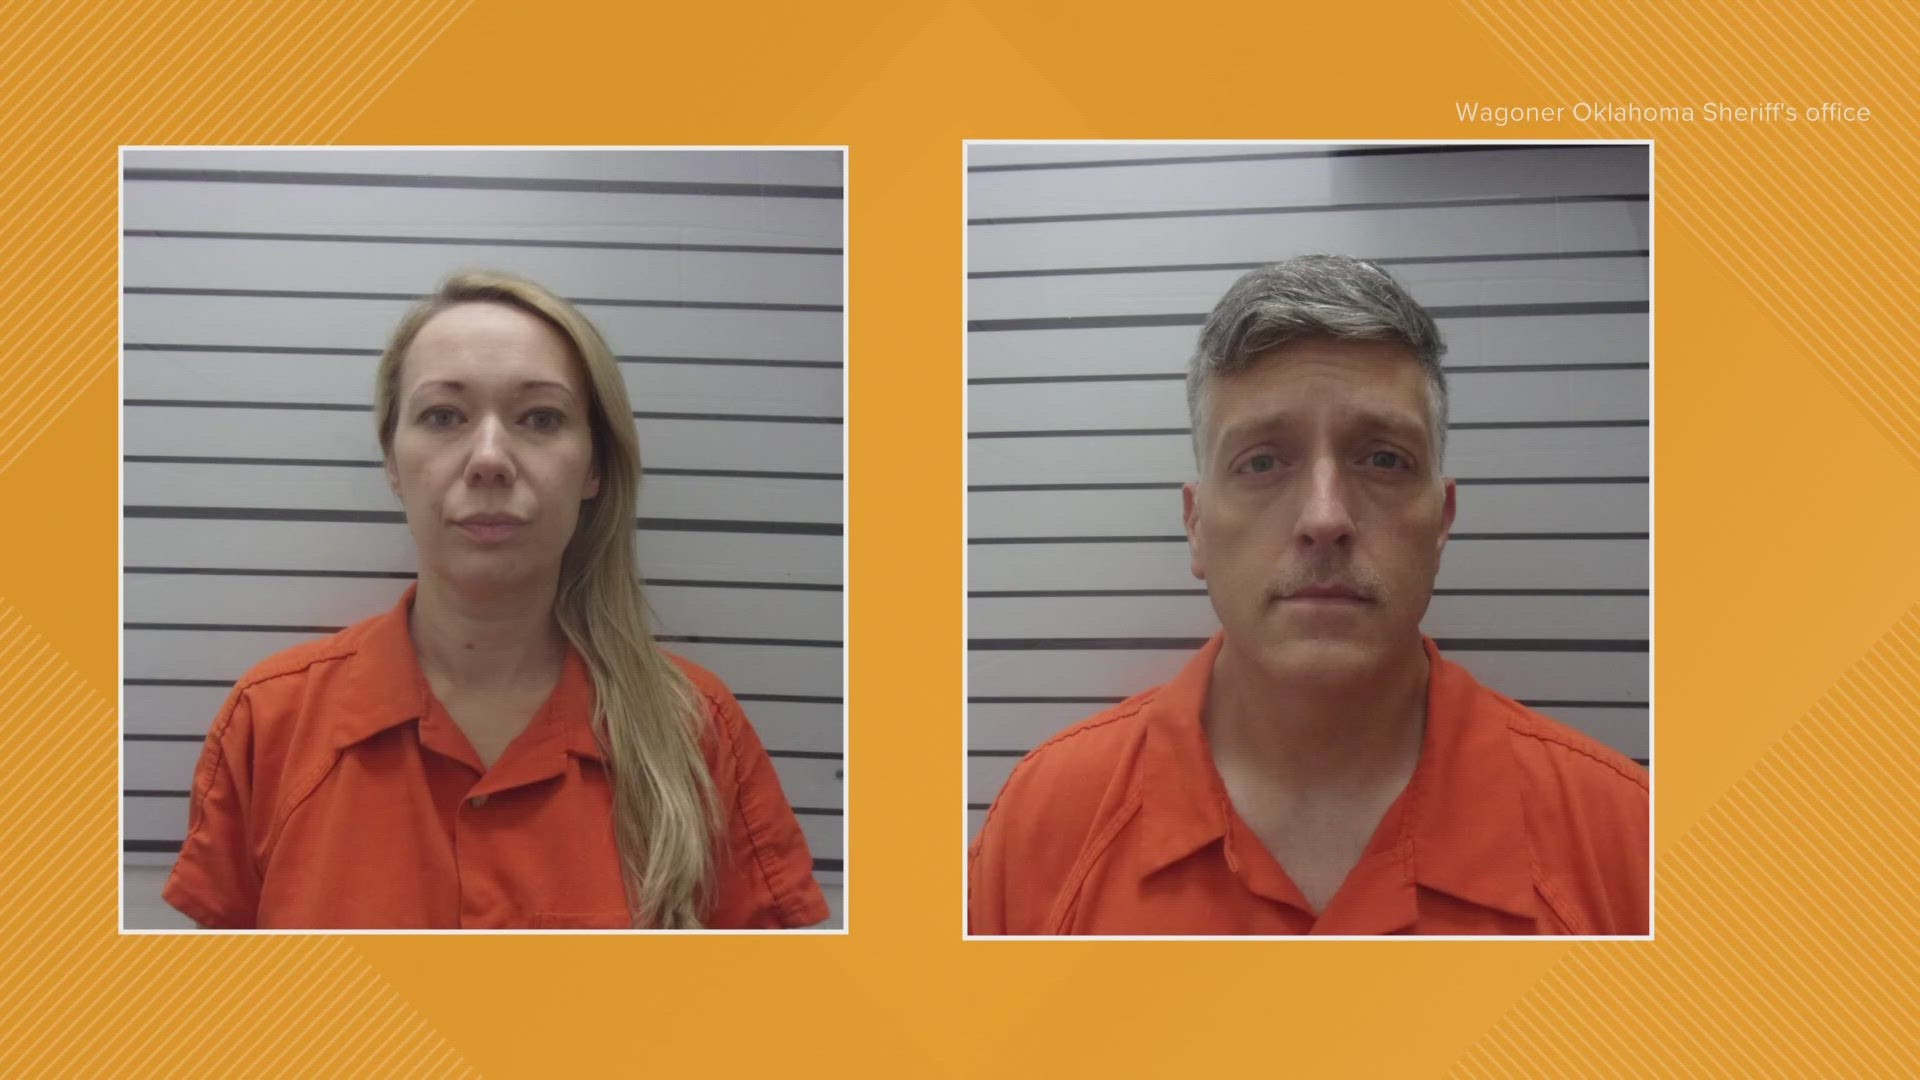 Jon and Carie Hallford face charges of abuse of a corpse, as well as money laundering and theft charges, the DA's office said.